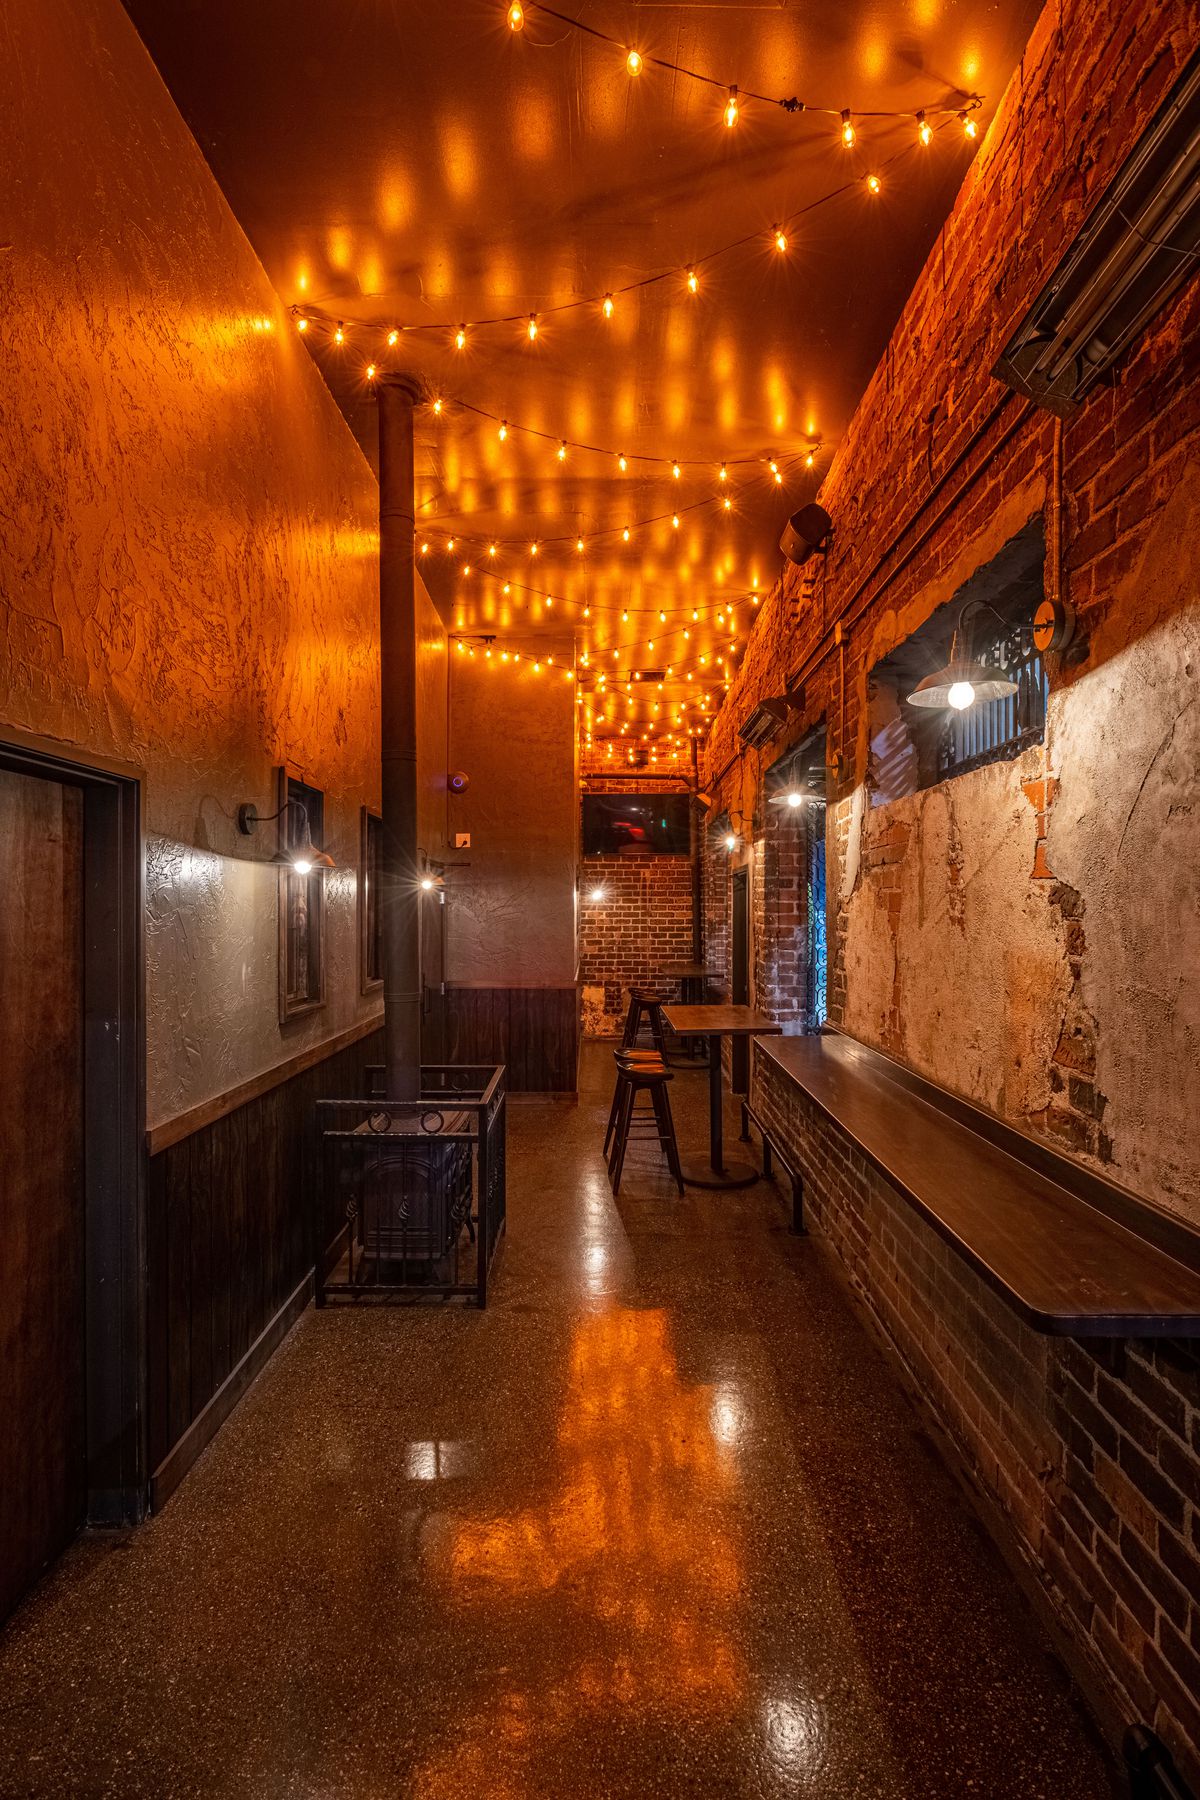 Hallway at the High Low bar in Los Angeles, California